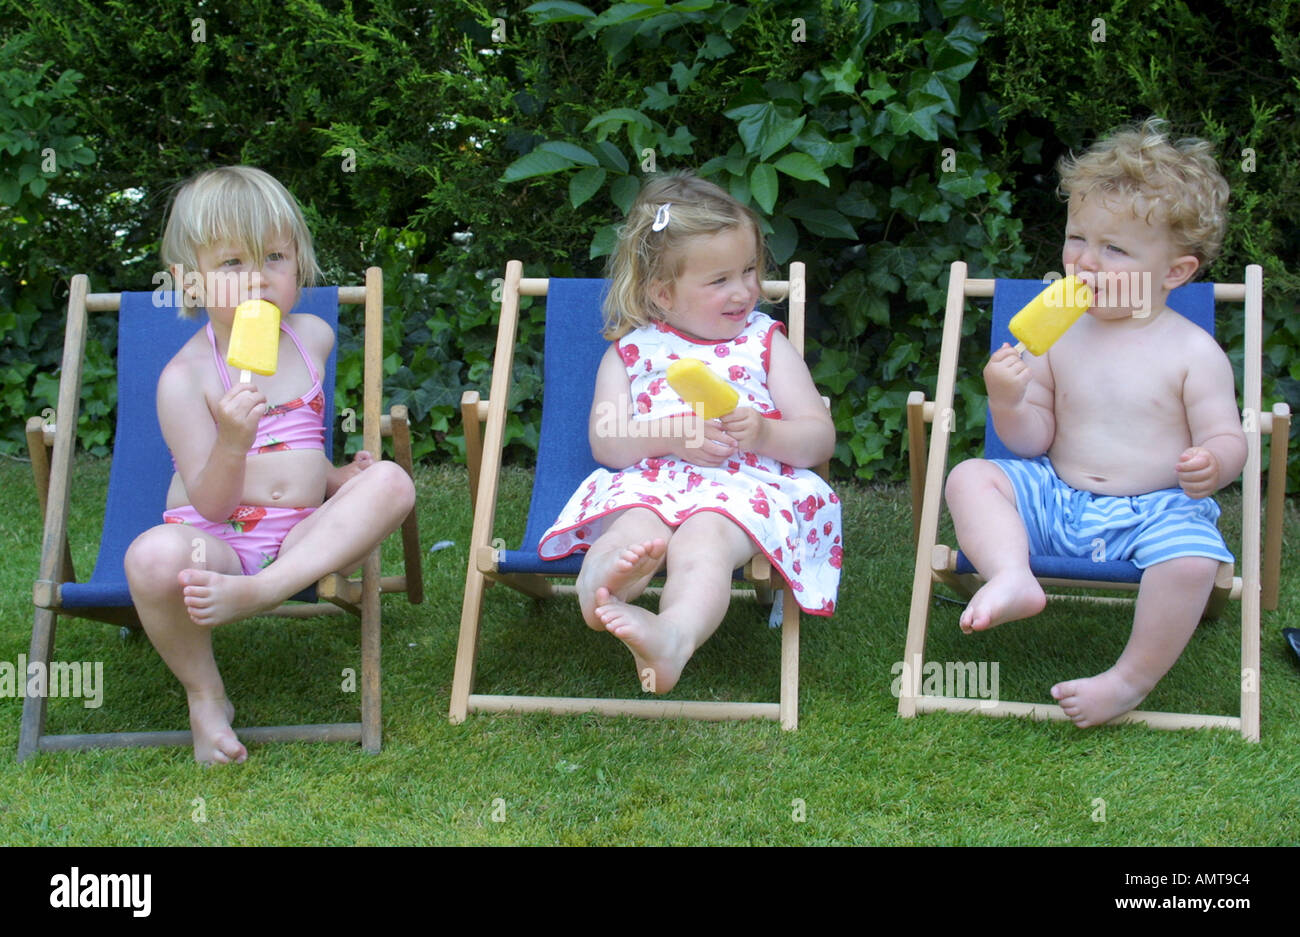 Two young girls and a boy eating lollies while sitting outside on  deckchairs Stock Photo - Alamy